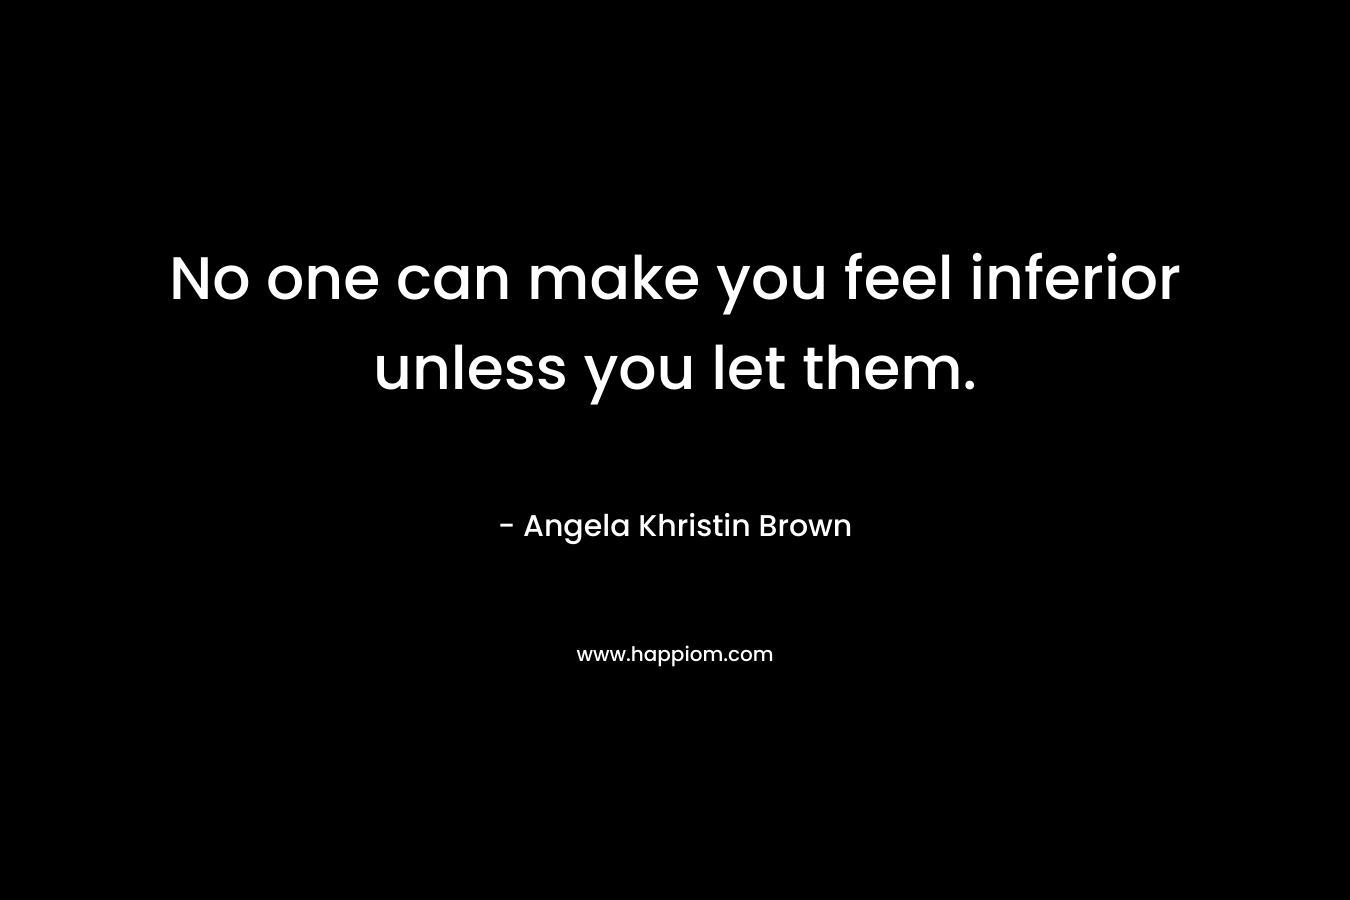 No one can make you feel inferior unless you let them.